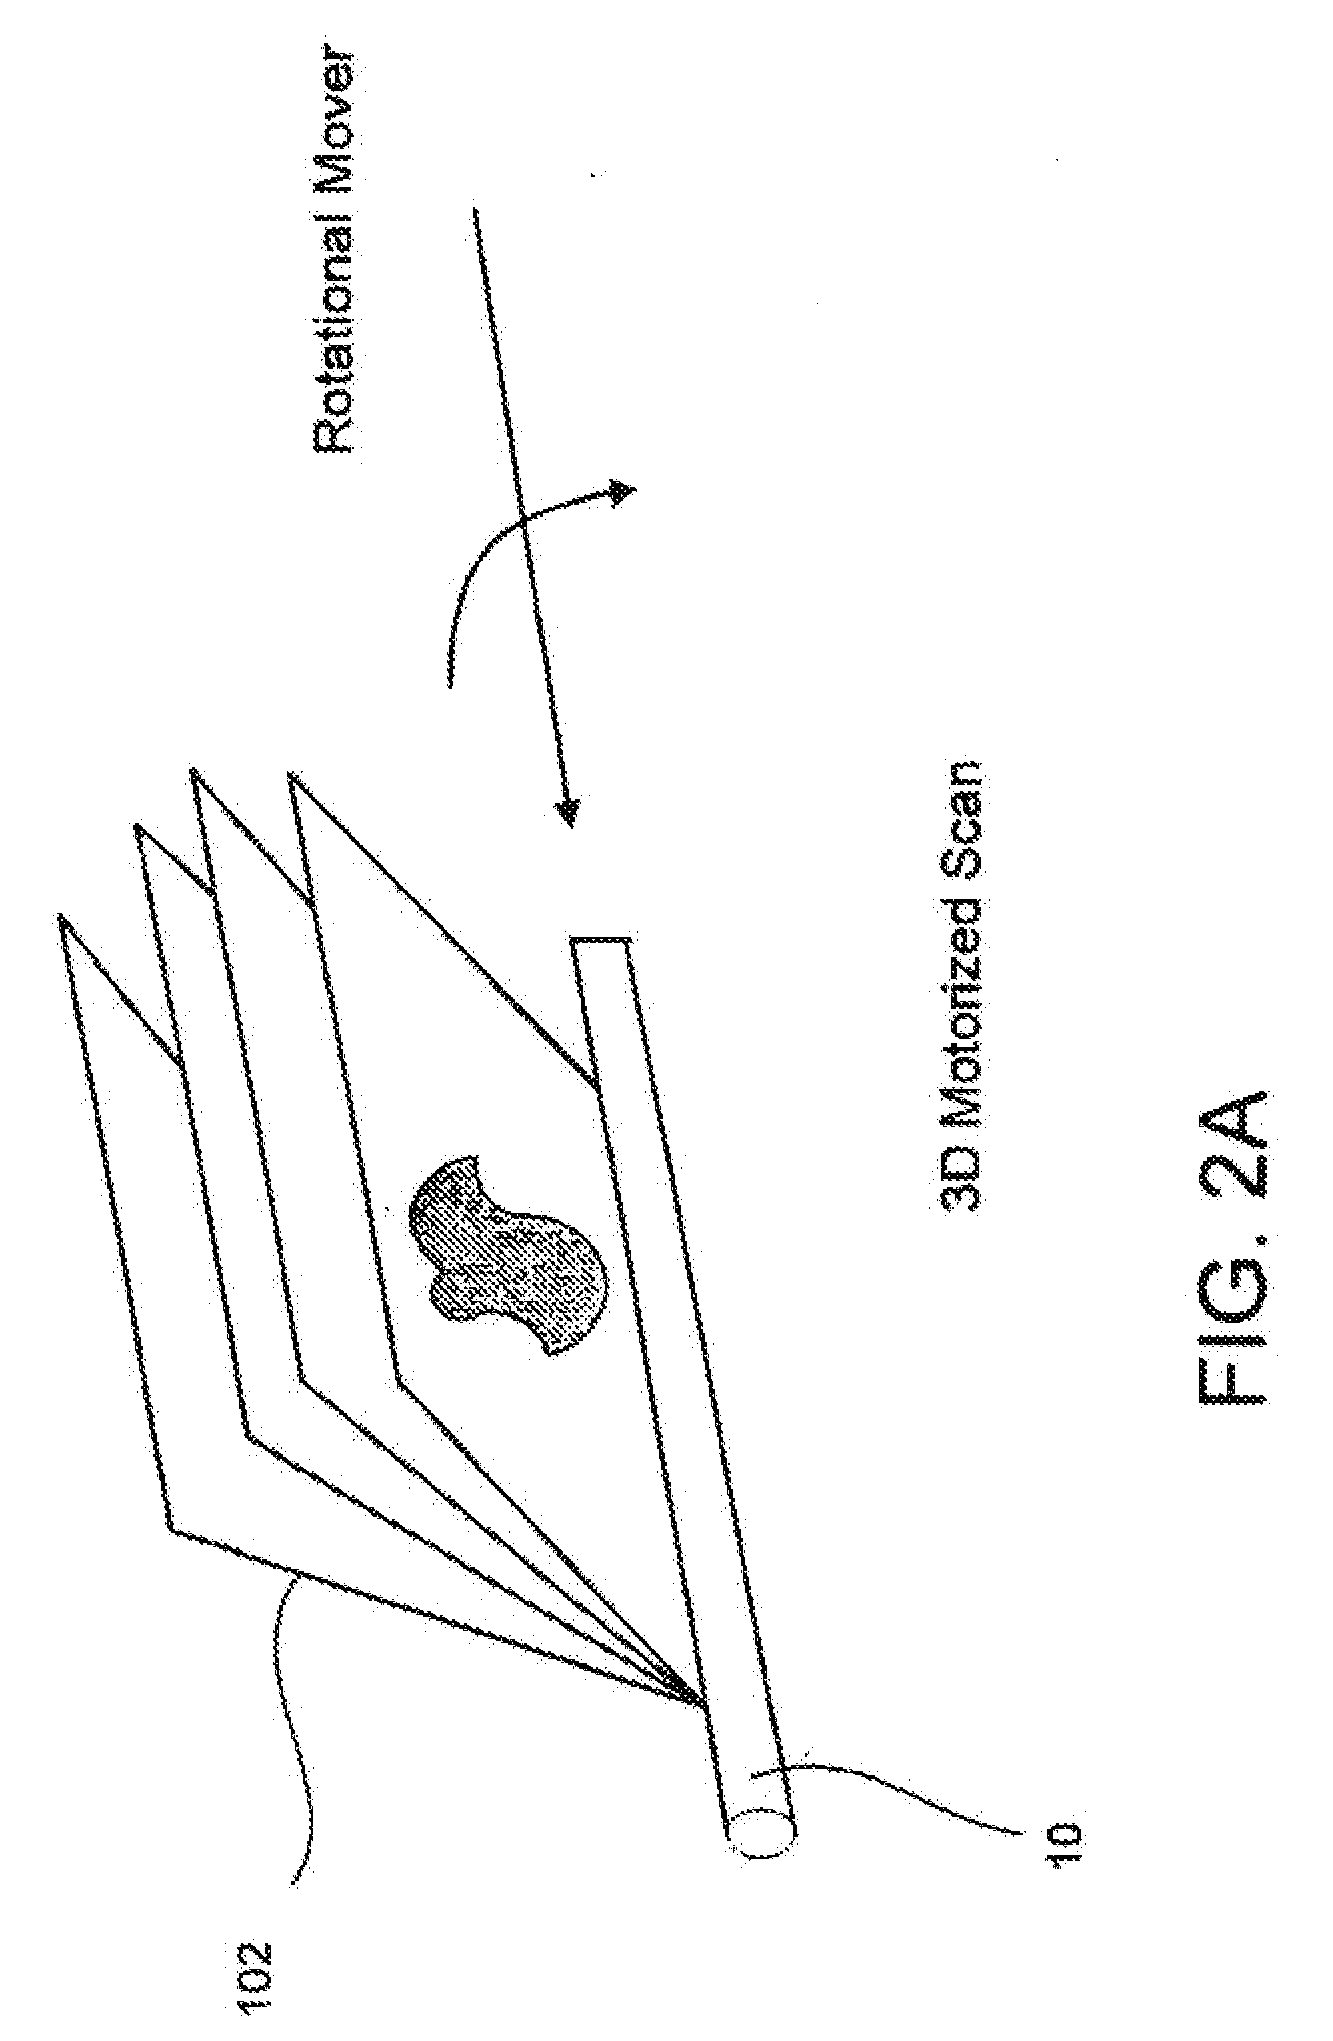 Object recognition system for medical imaging